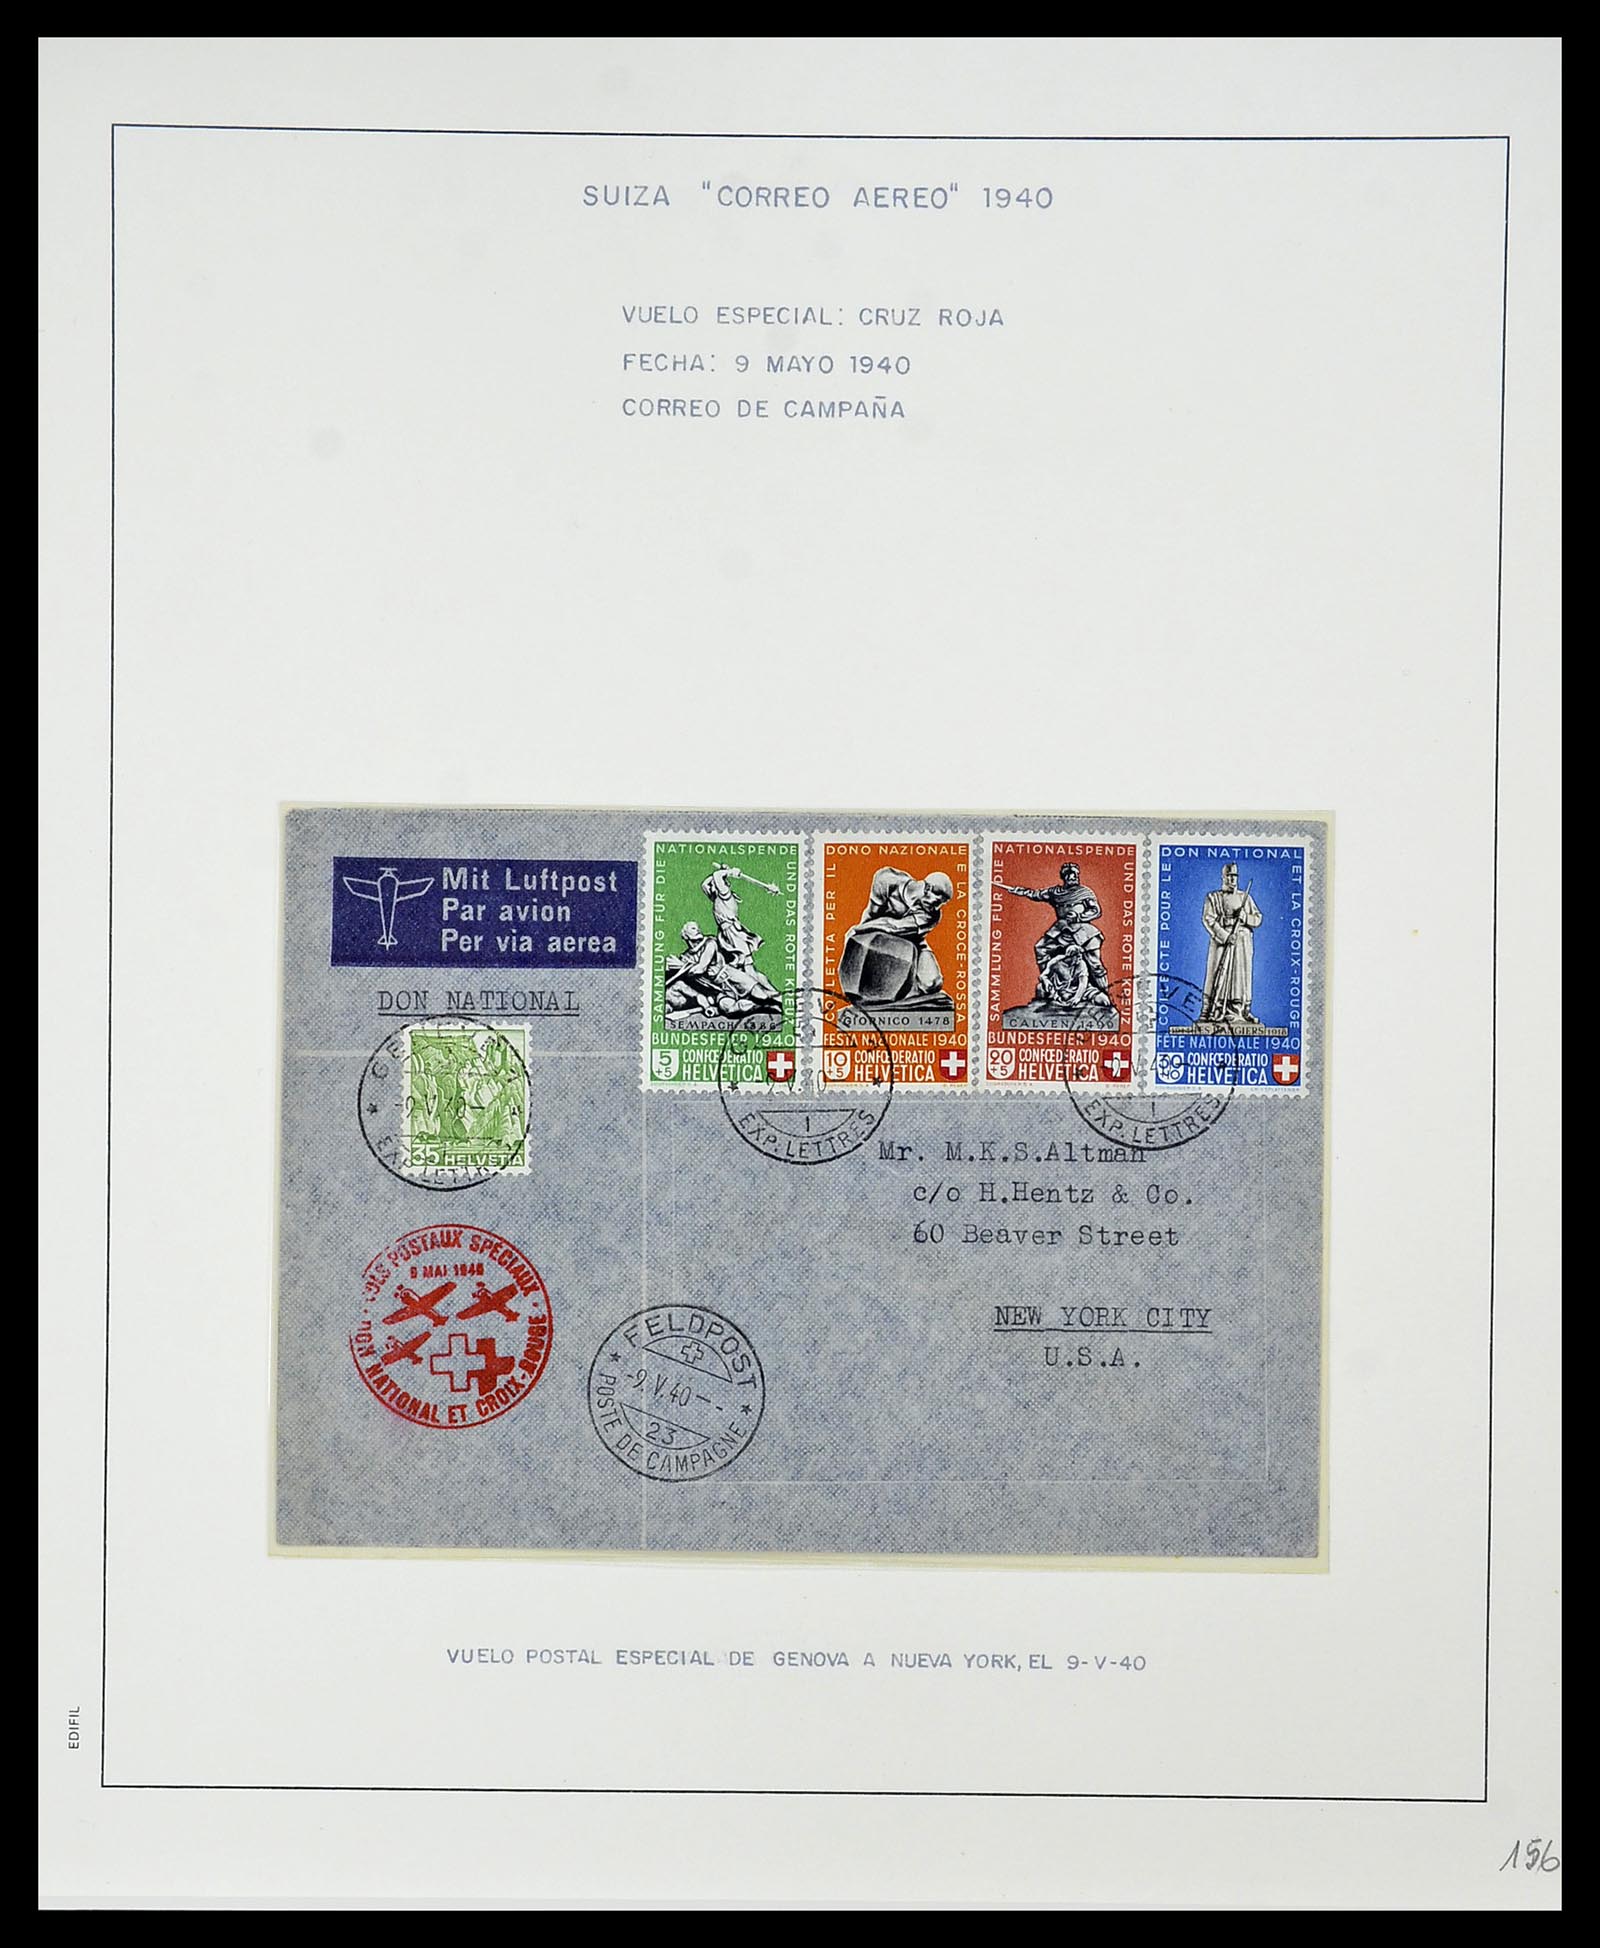 34137 032 - Stamp collection 34137 Switzerland airmail covers 1923-1963.